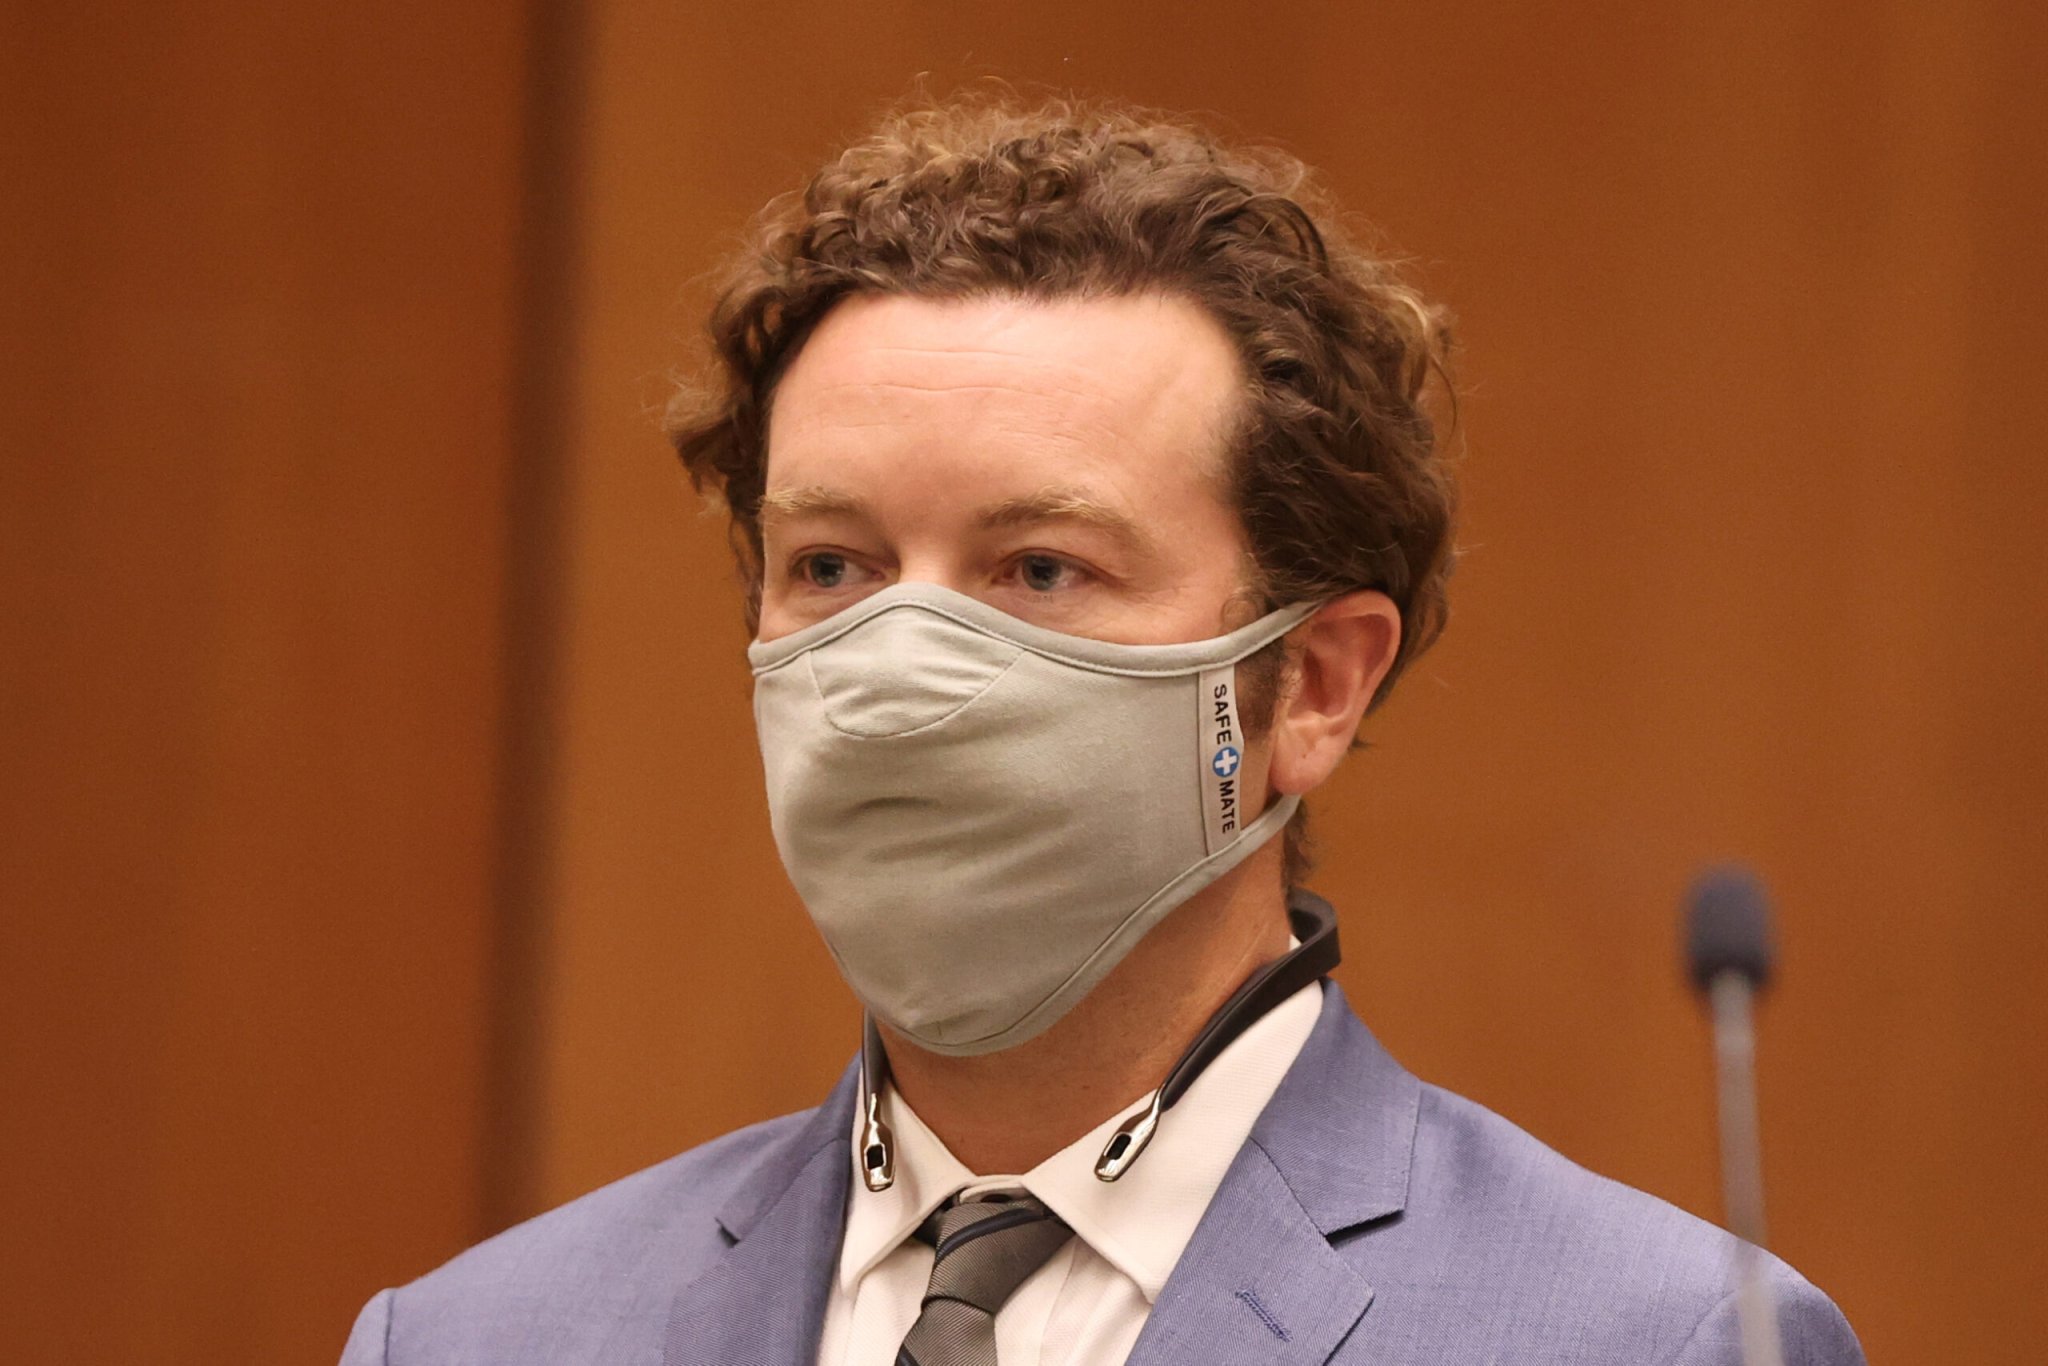 Danny Masterson Gets 30 Years in Prison For Rape